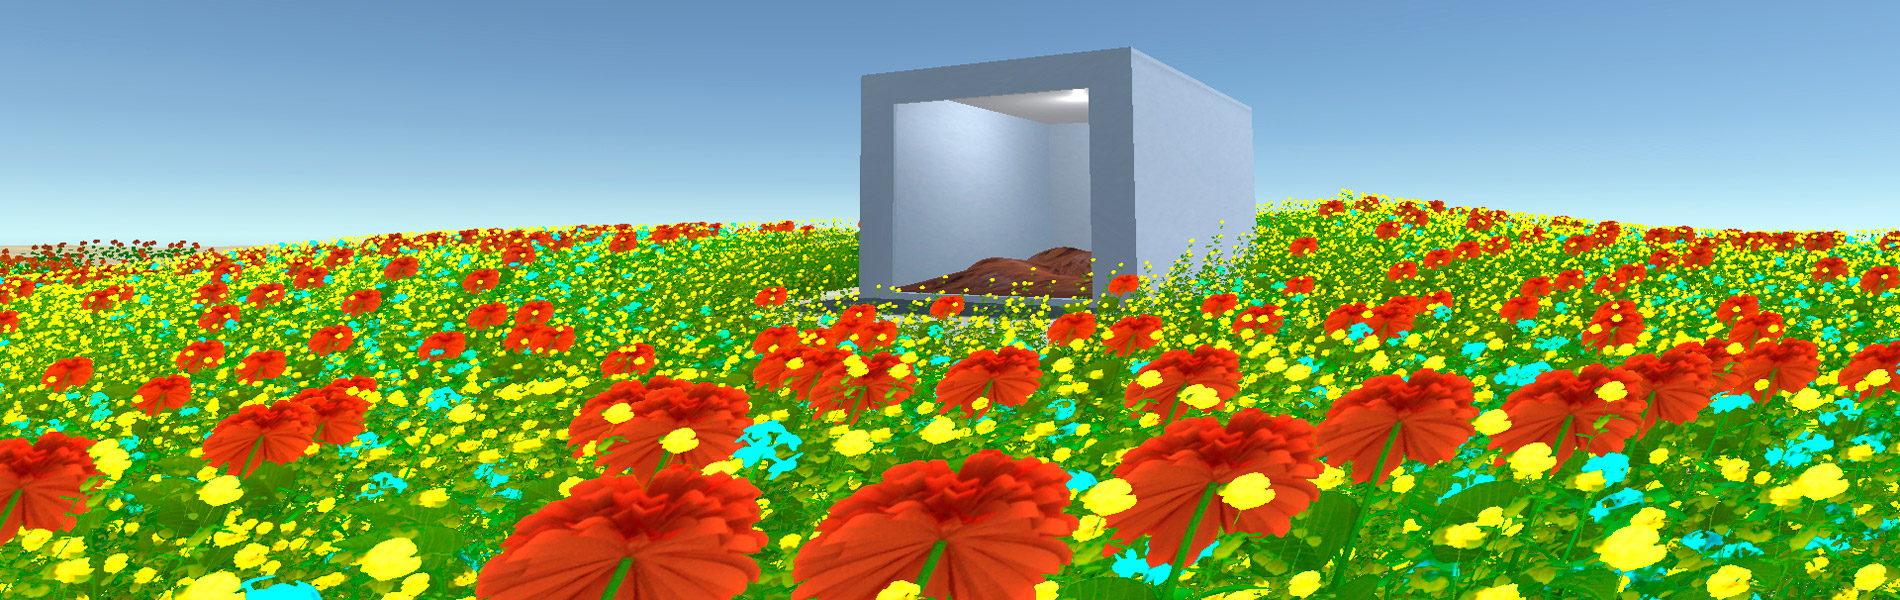 Detail from a screengrab of a computer-generated, interactive digital work